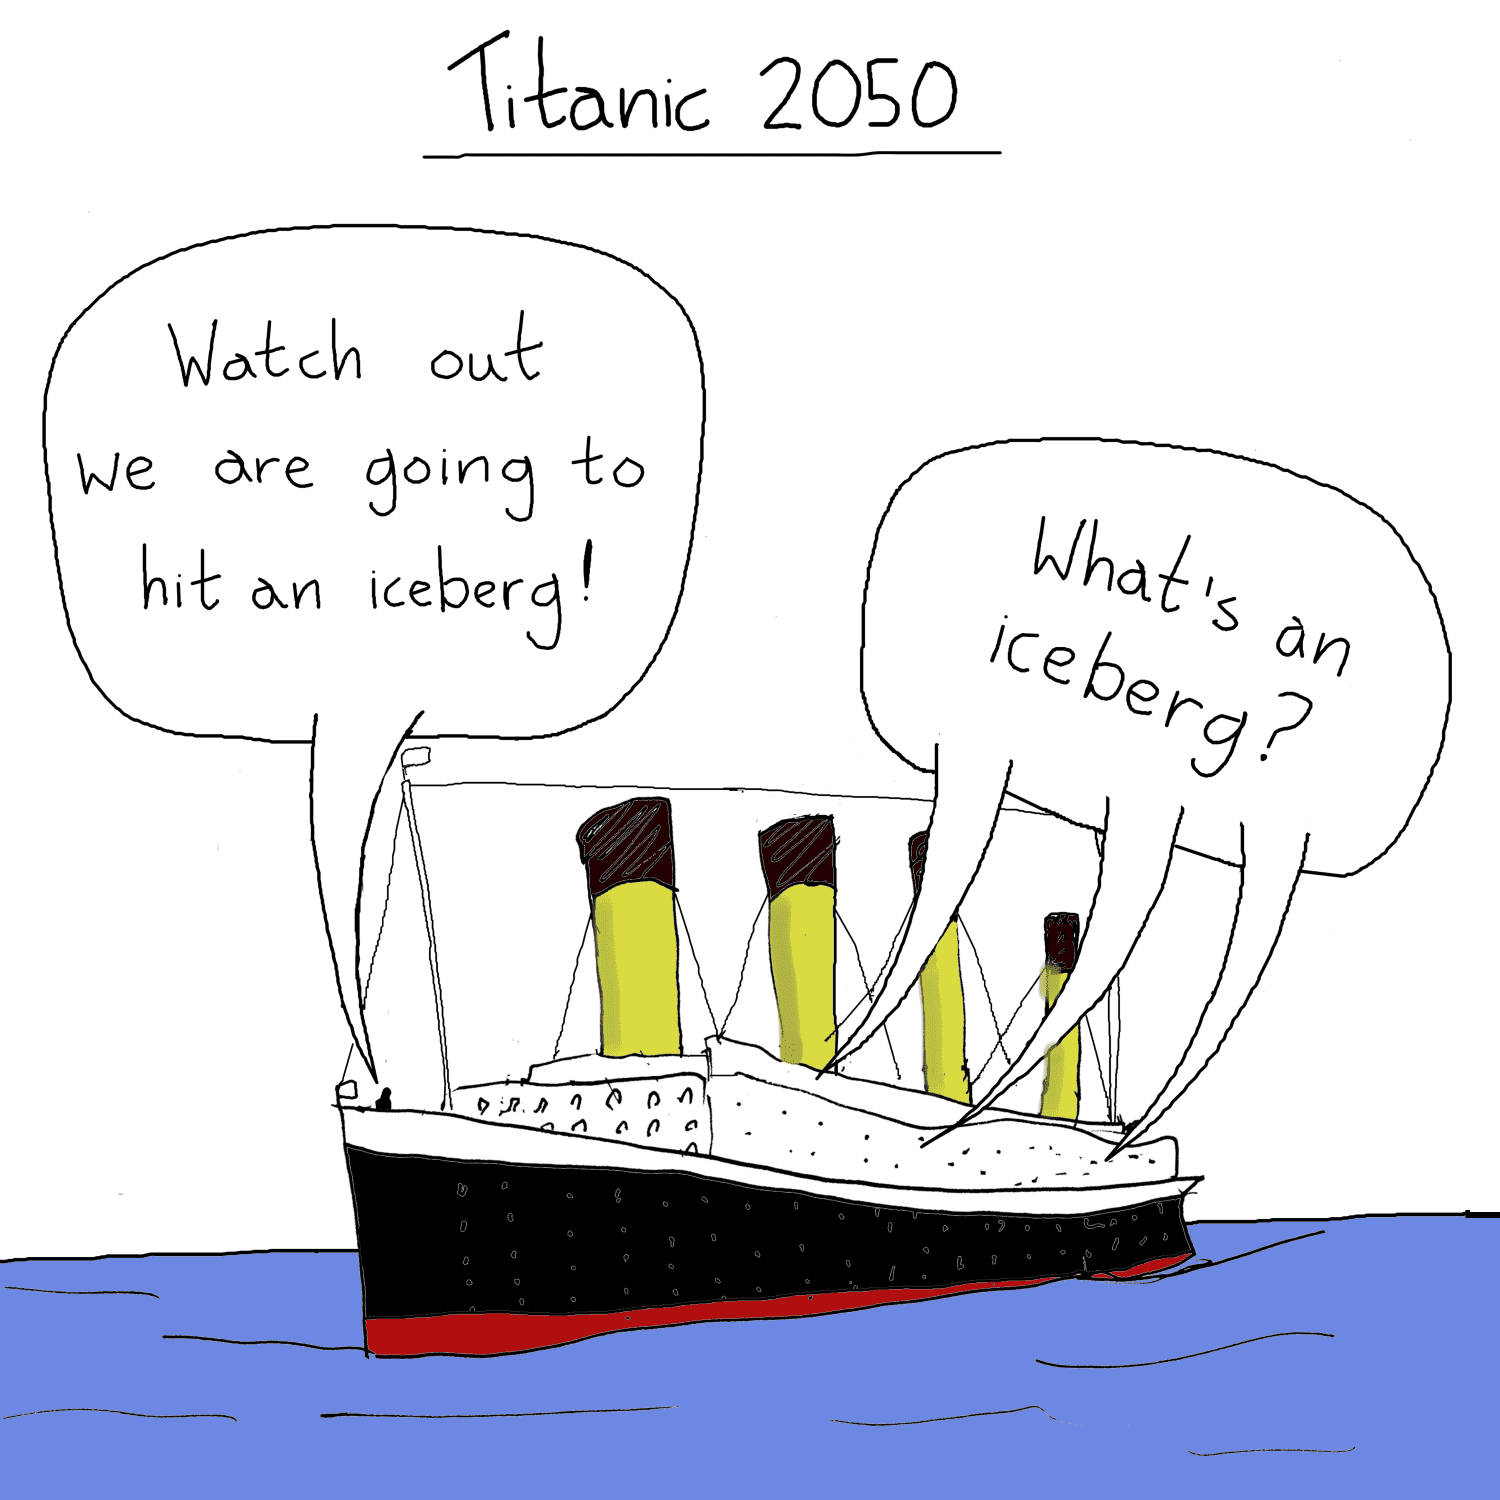 A cartoon of the Titanic. The headline reads "Titanic 2050". One speech bubble says "Watch out we're going to hit an iceberg!", another speech bubble says "what's an iceberg?"